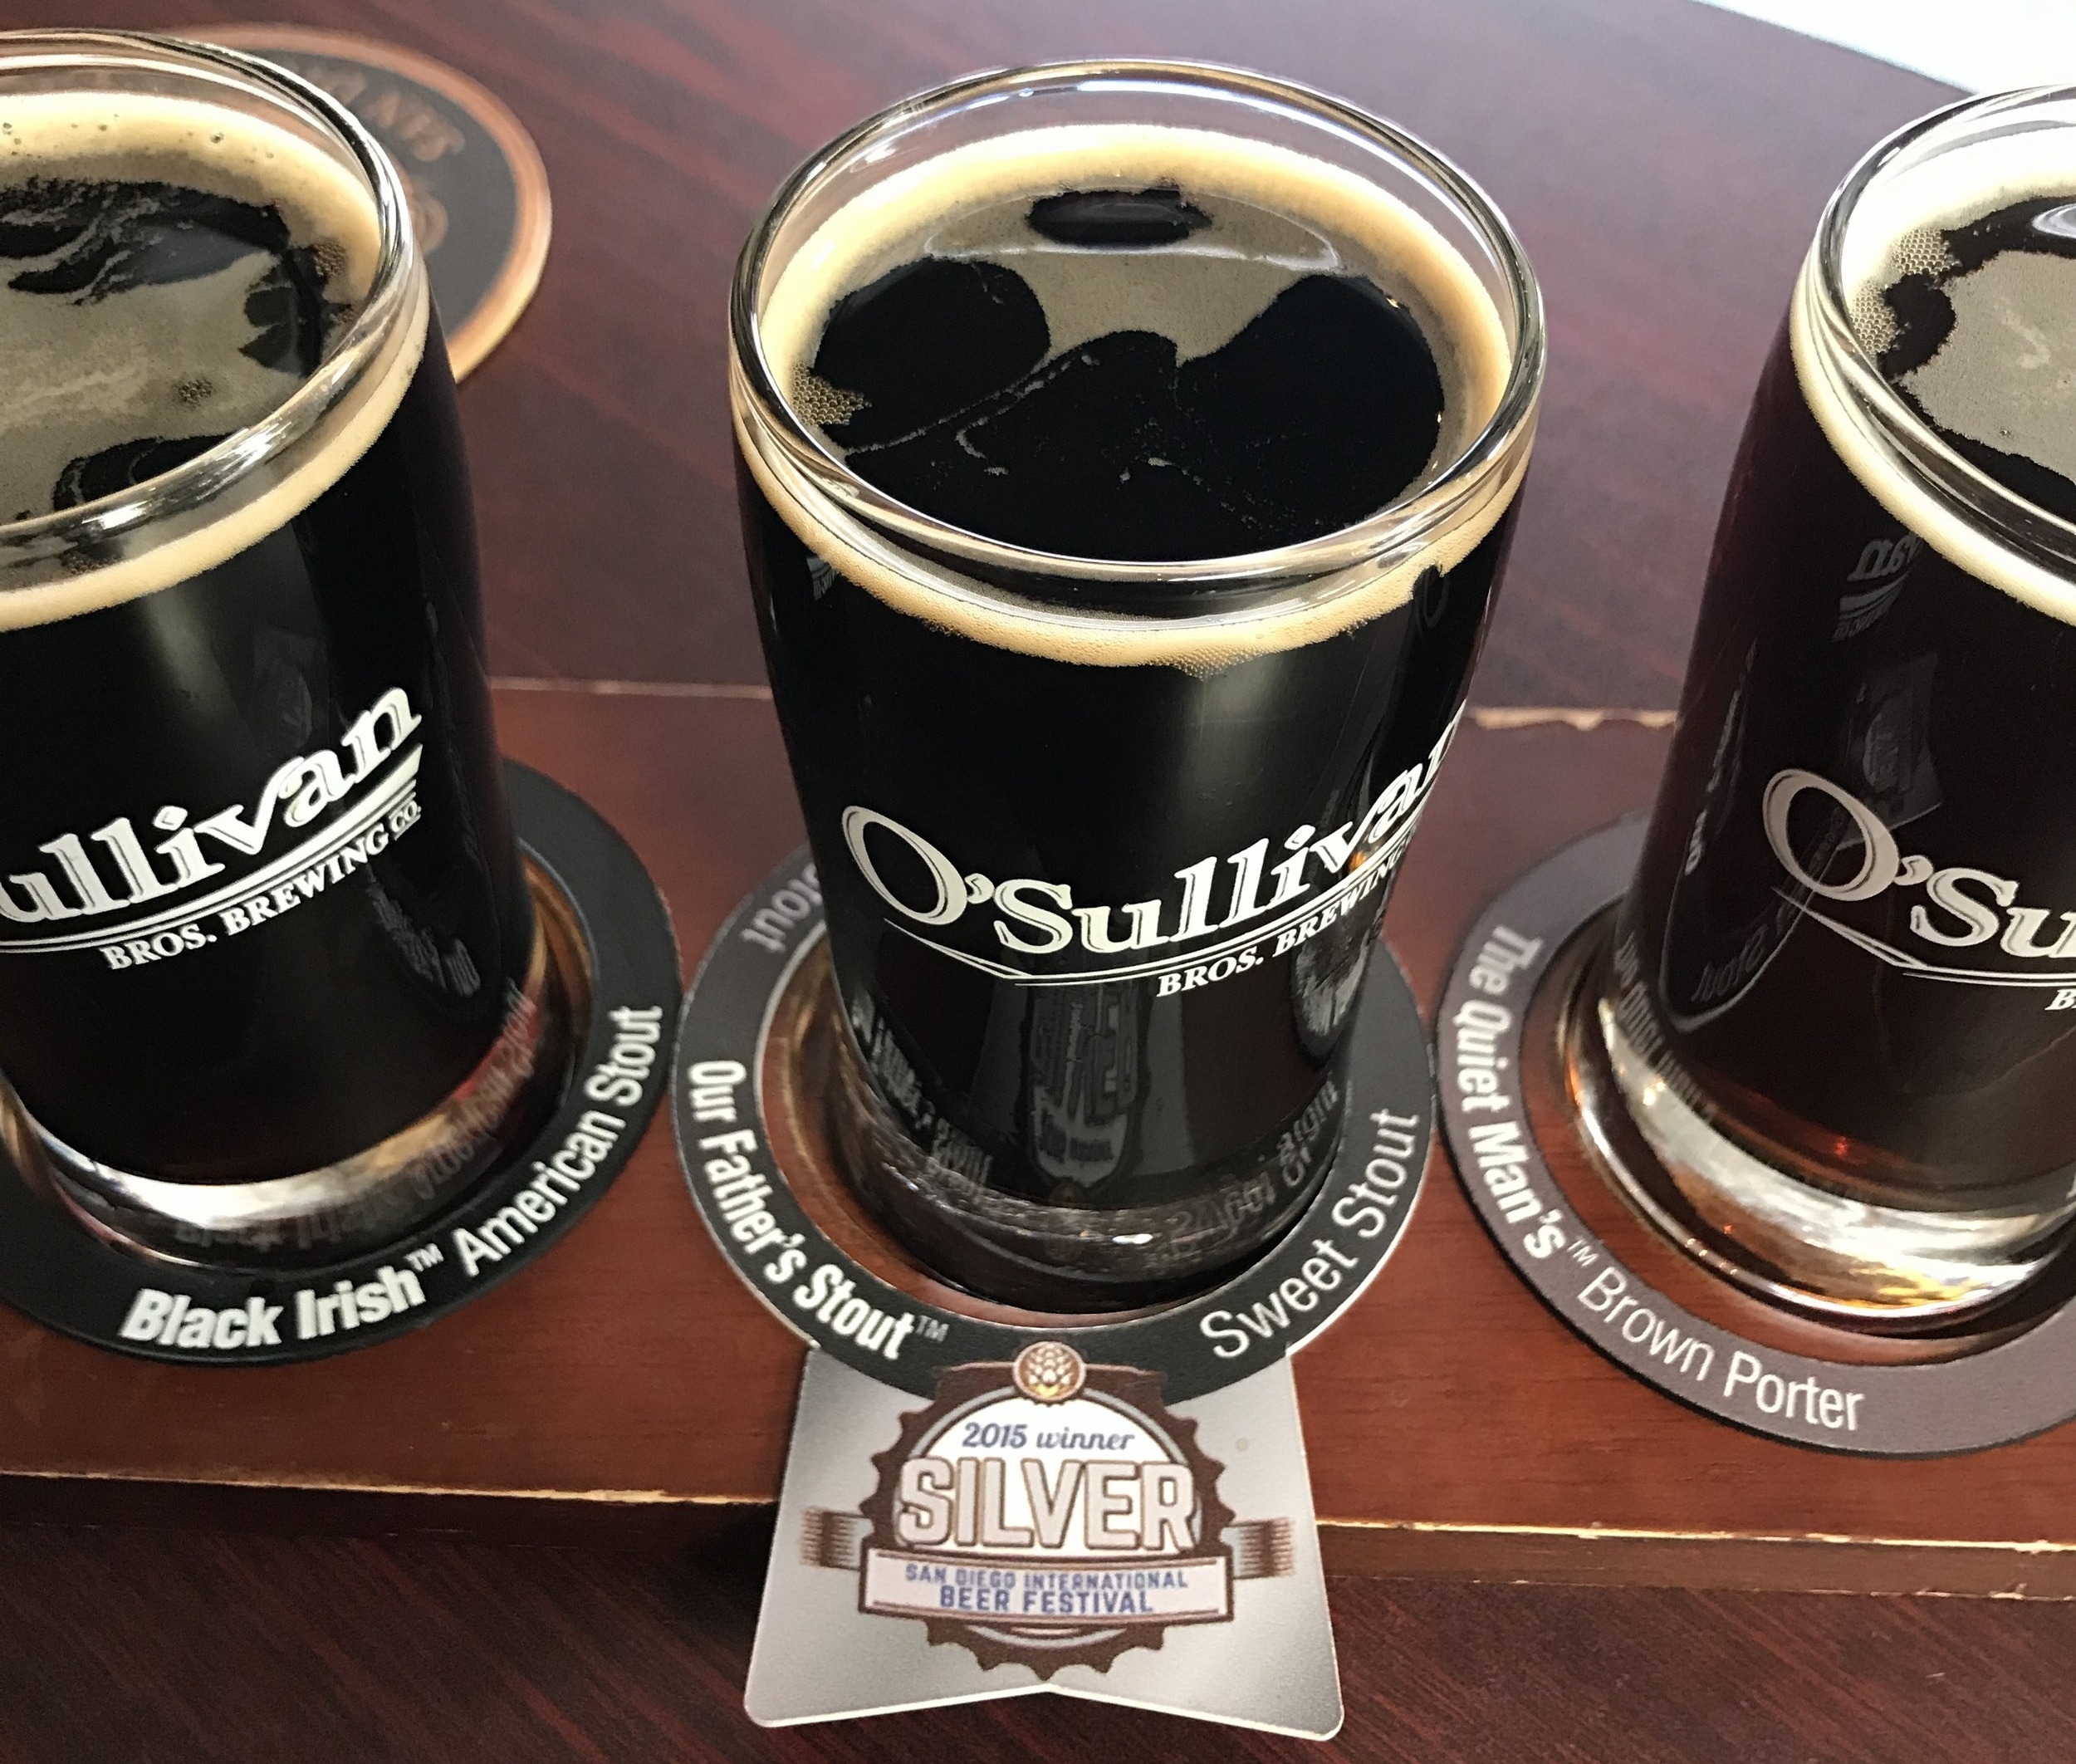 The flight trays are fitted with little rings that name each beer. That might be the biggest advance in flight service since the invention of wooden trays with cups in them.